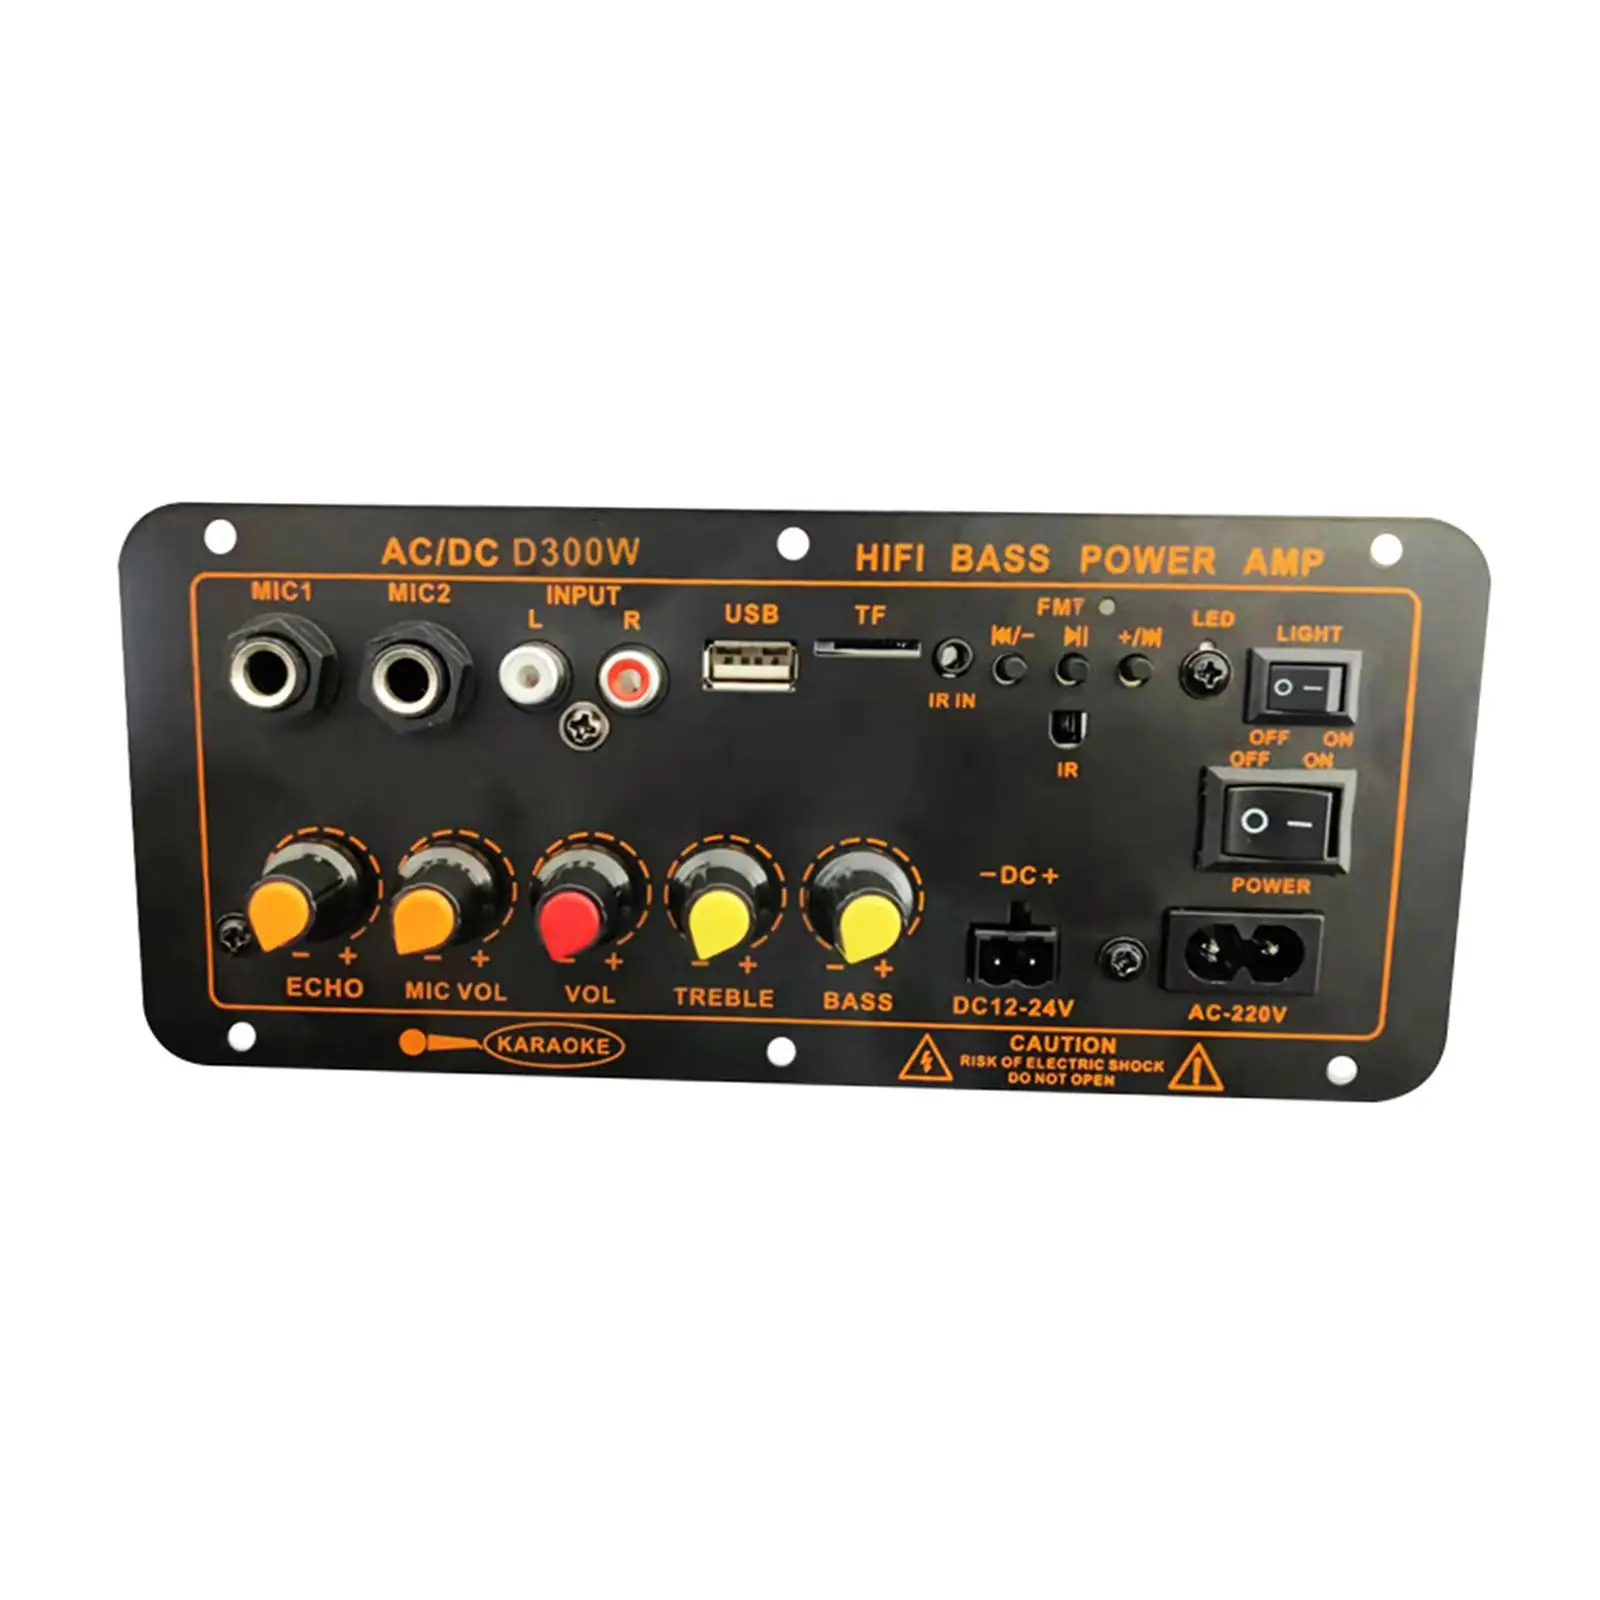 Bluetooth Digital Audio Amp Amplifier Board EU 220V Adapter Durable with Bass and Treble Control Knobs with Remote Control